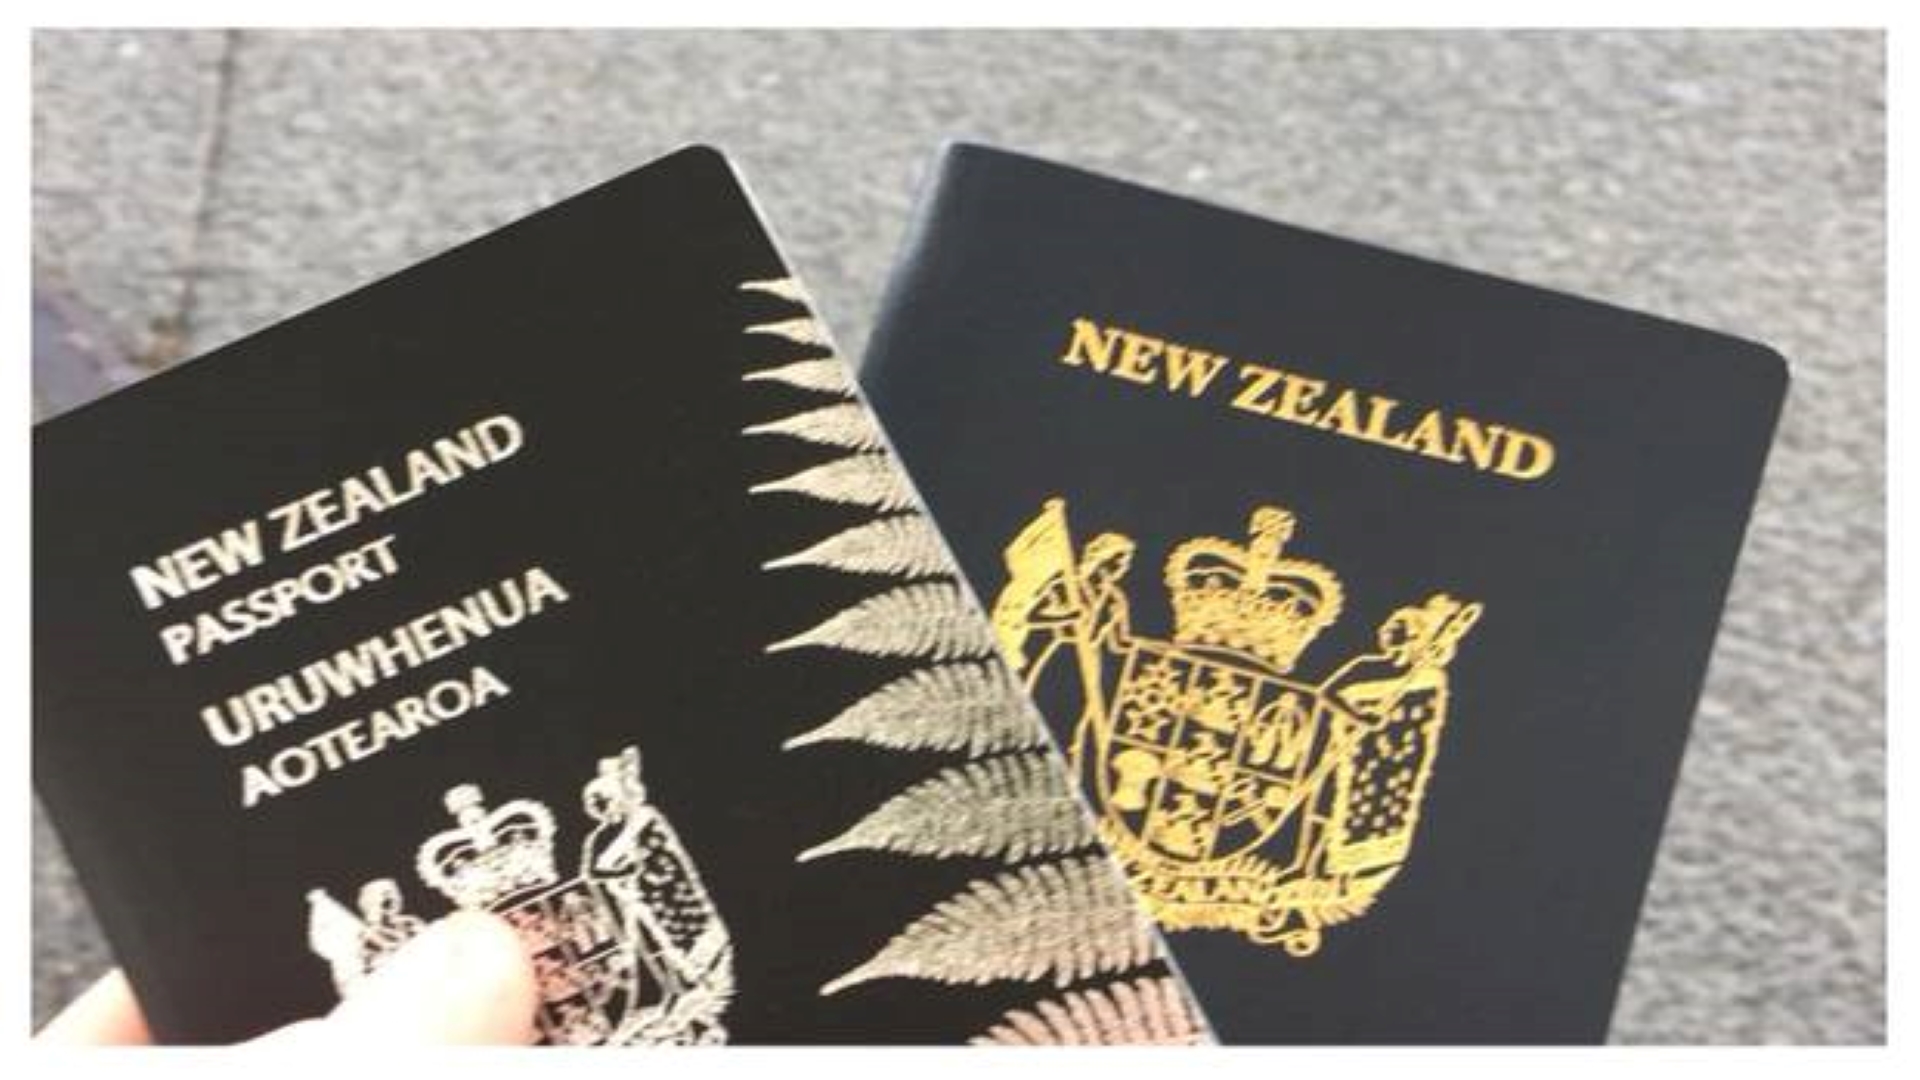 New Zealand World’s Most Desirable Passport Amid Covid / Travel Chaos